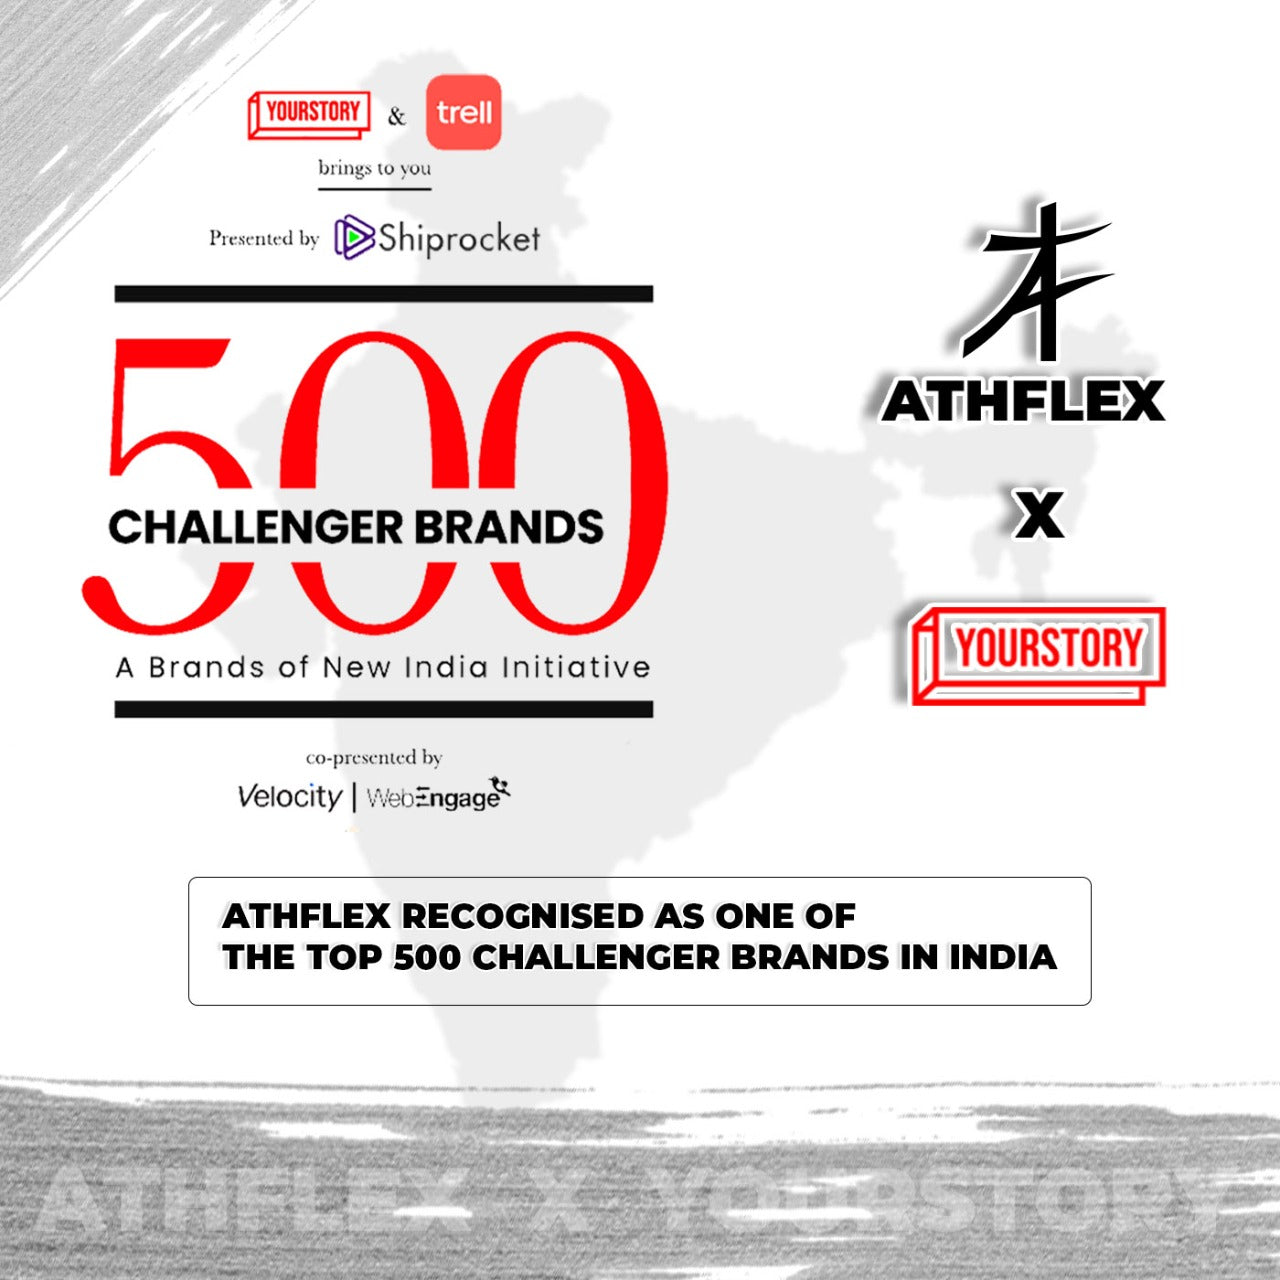 YourStory - 500 Challenger Brands